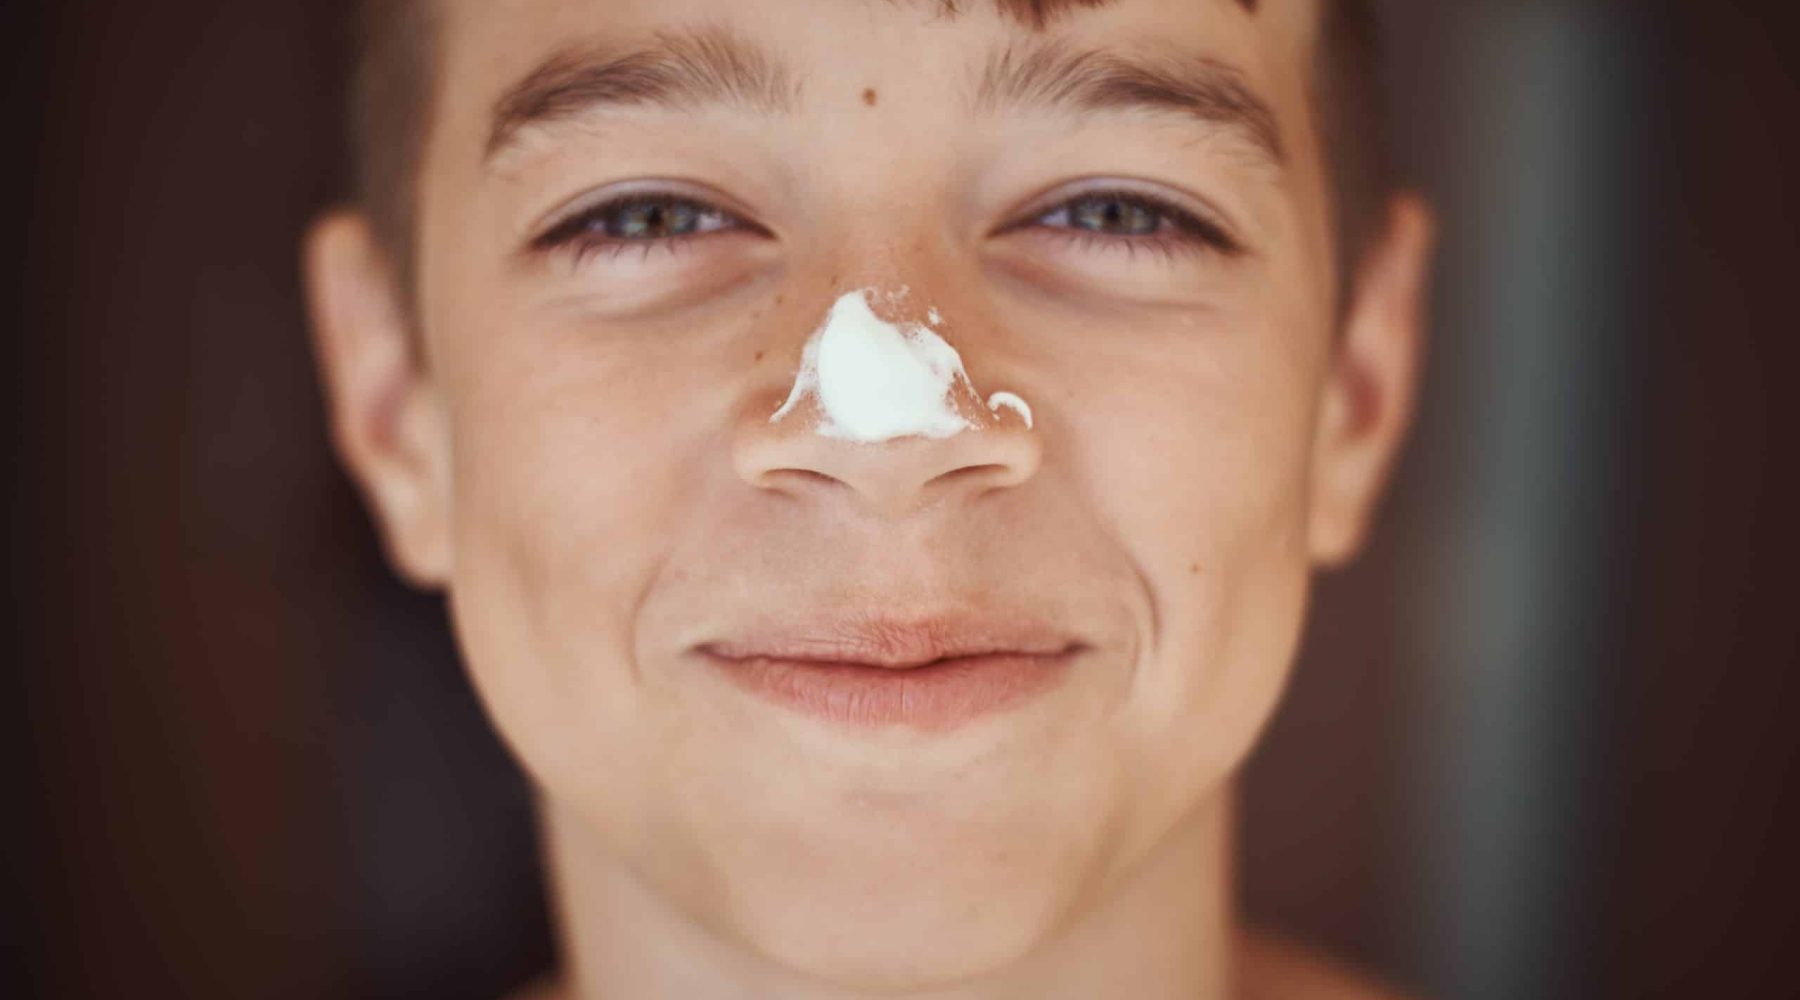 Happy smile boy with sunscreen cream on nose, close up portrait. Summer holidays and vacation concept